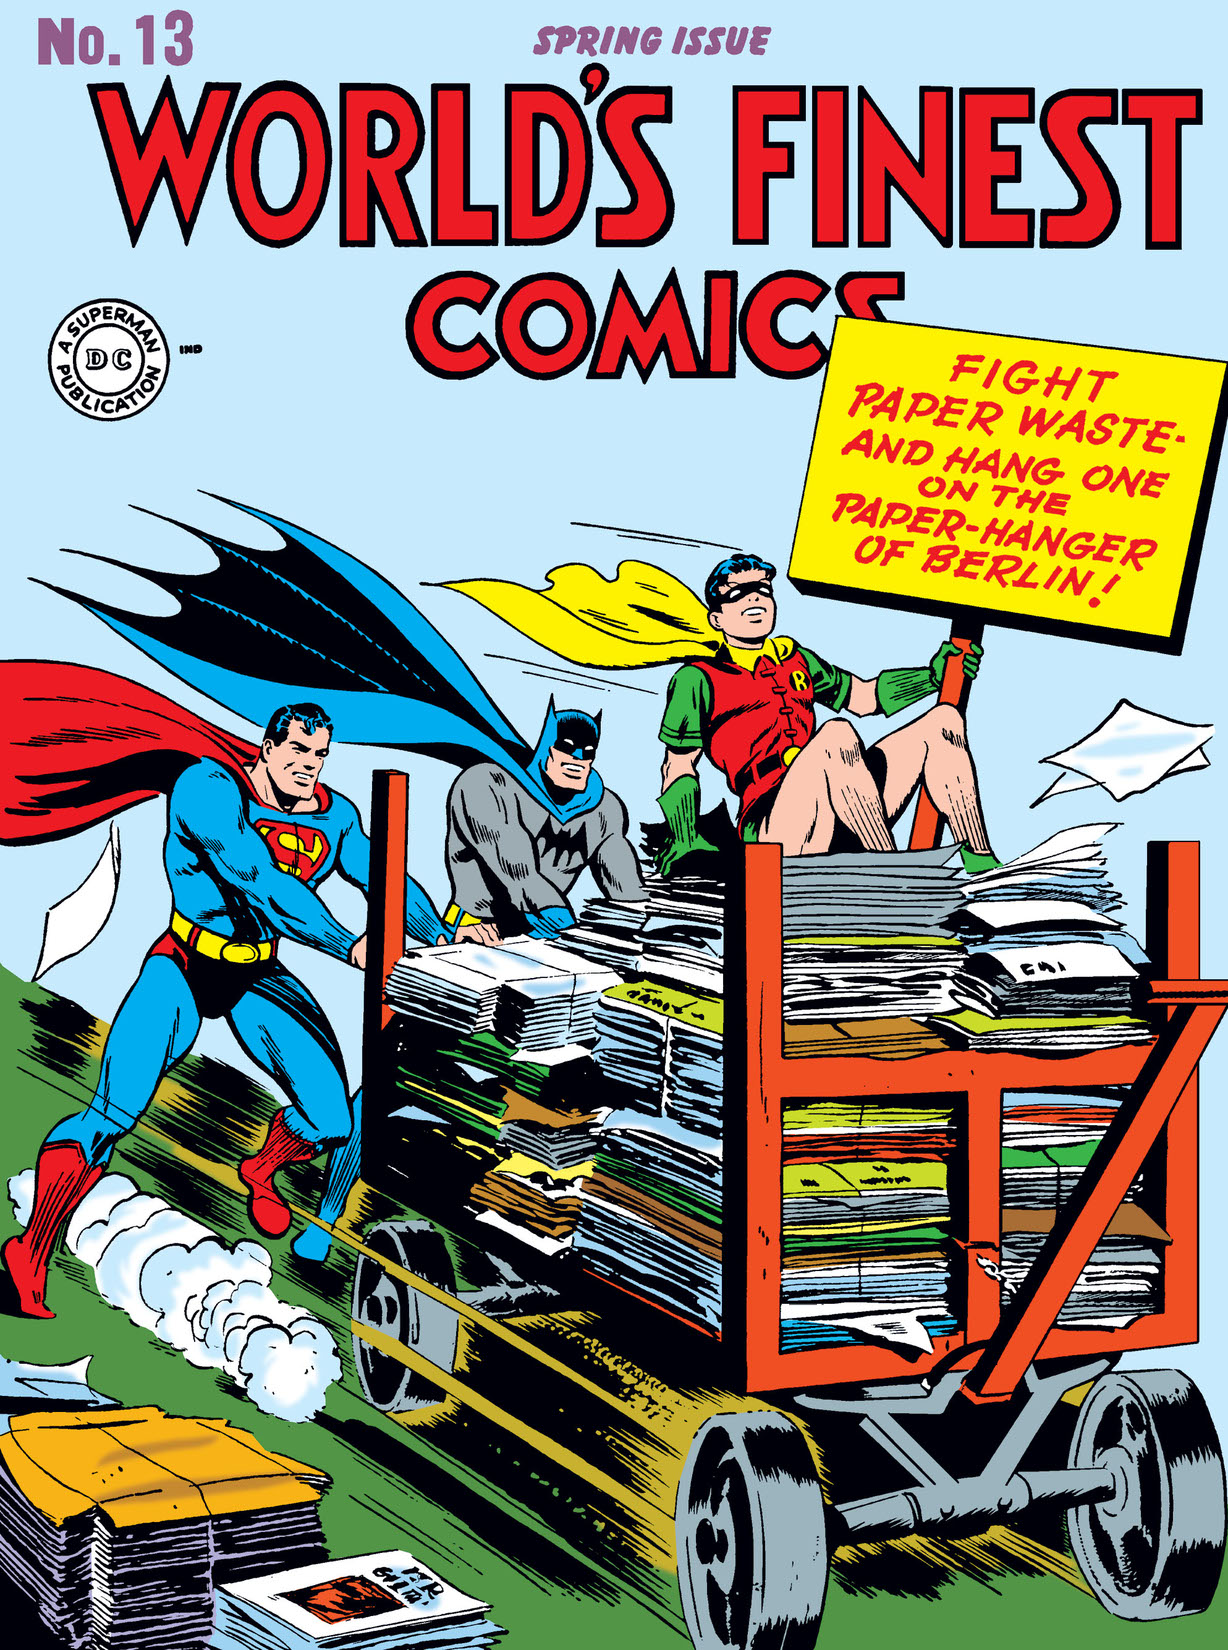 World's Finest Comics (1941-) #13 preview images